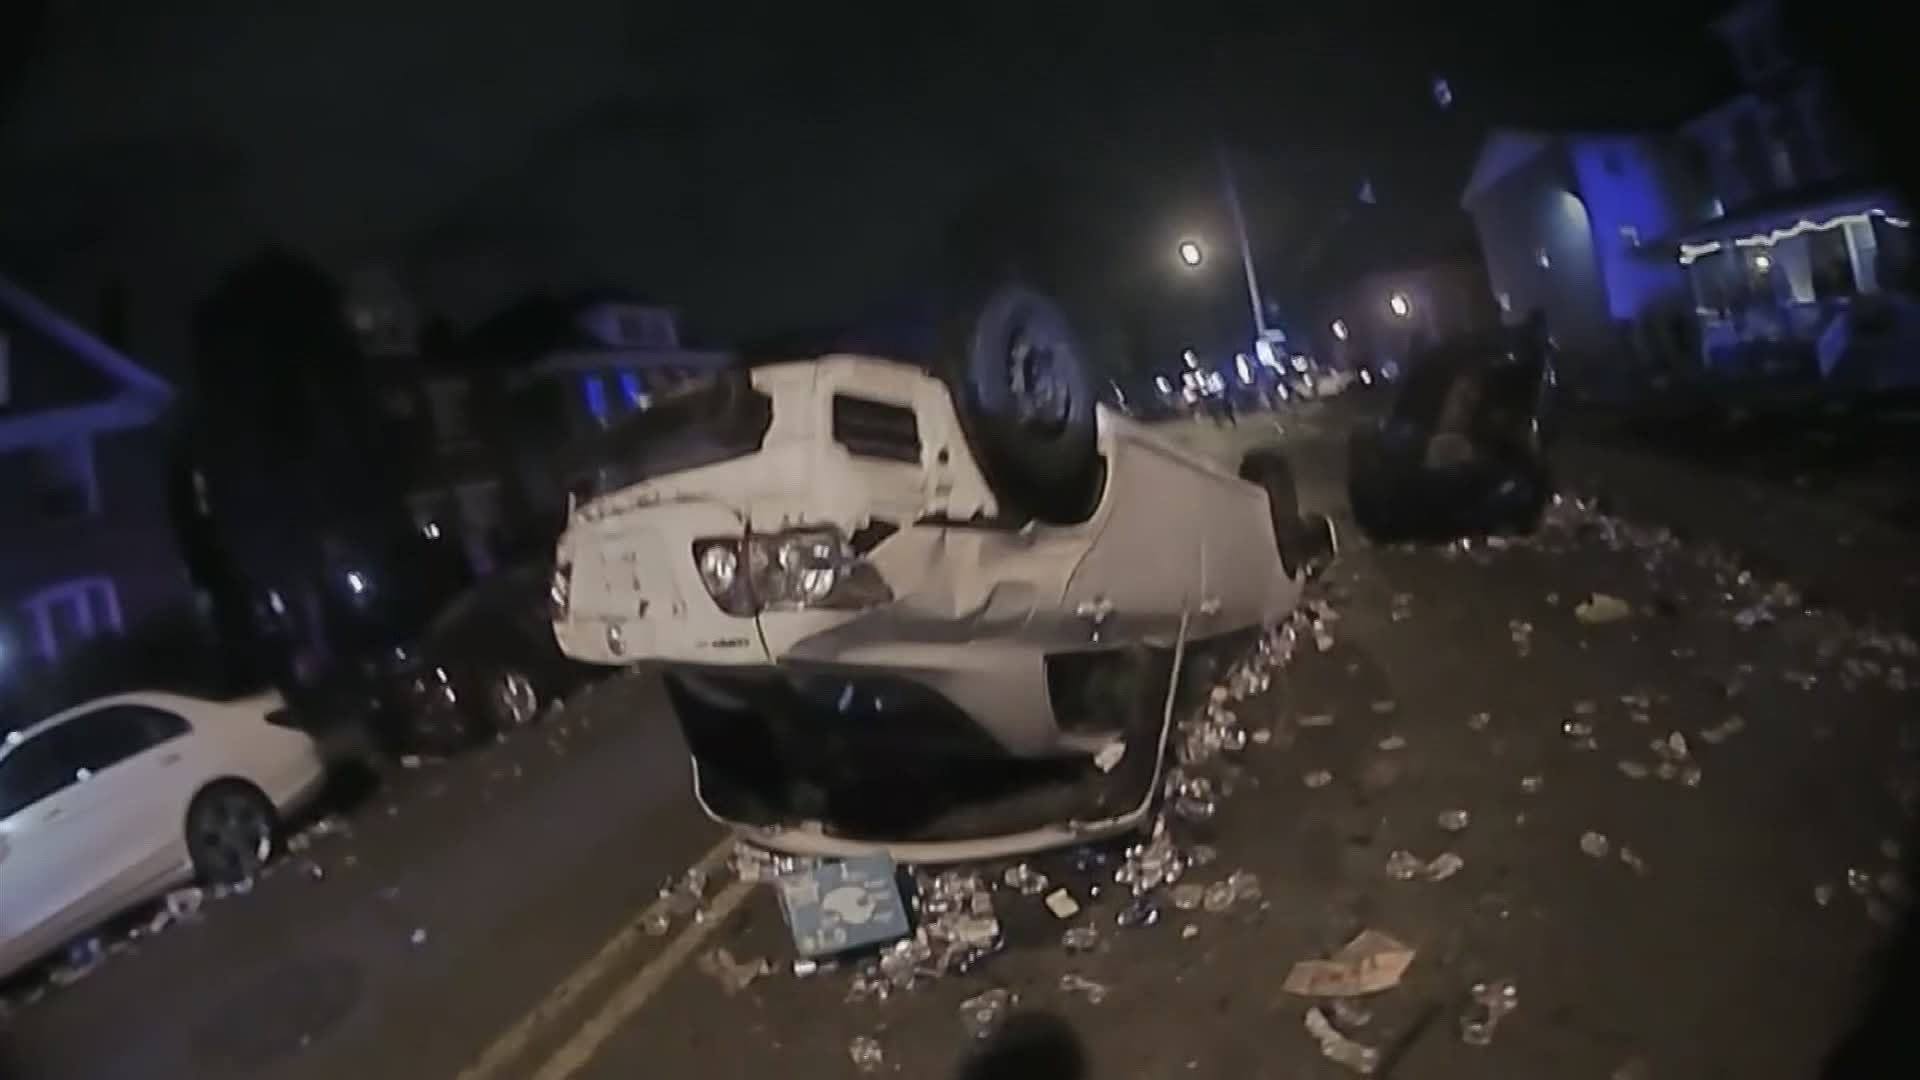 Seven cars were flipped during "ChittFest" last weekend.